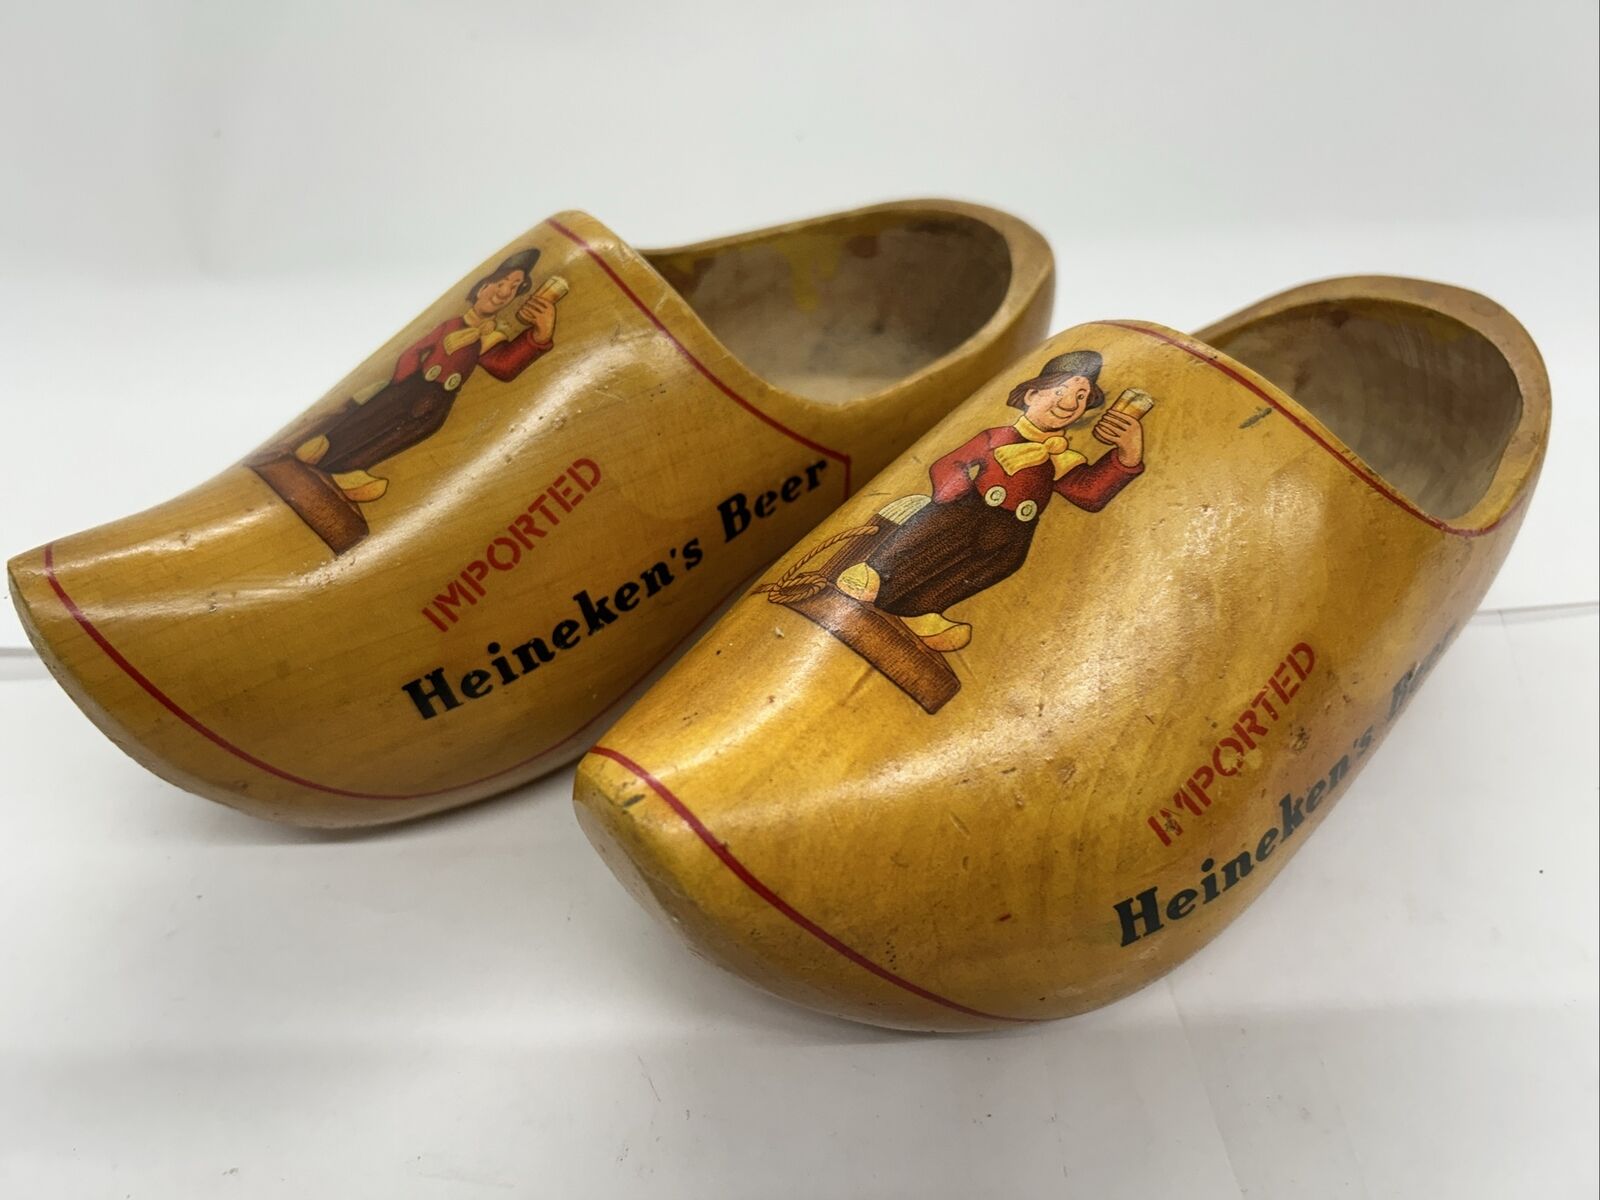 Vintage Imported Heineken’s Beer Wooden Clogs Pair With Left And Right Feet